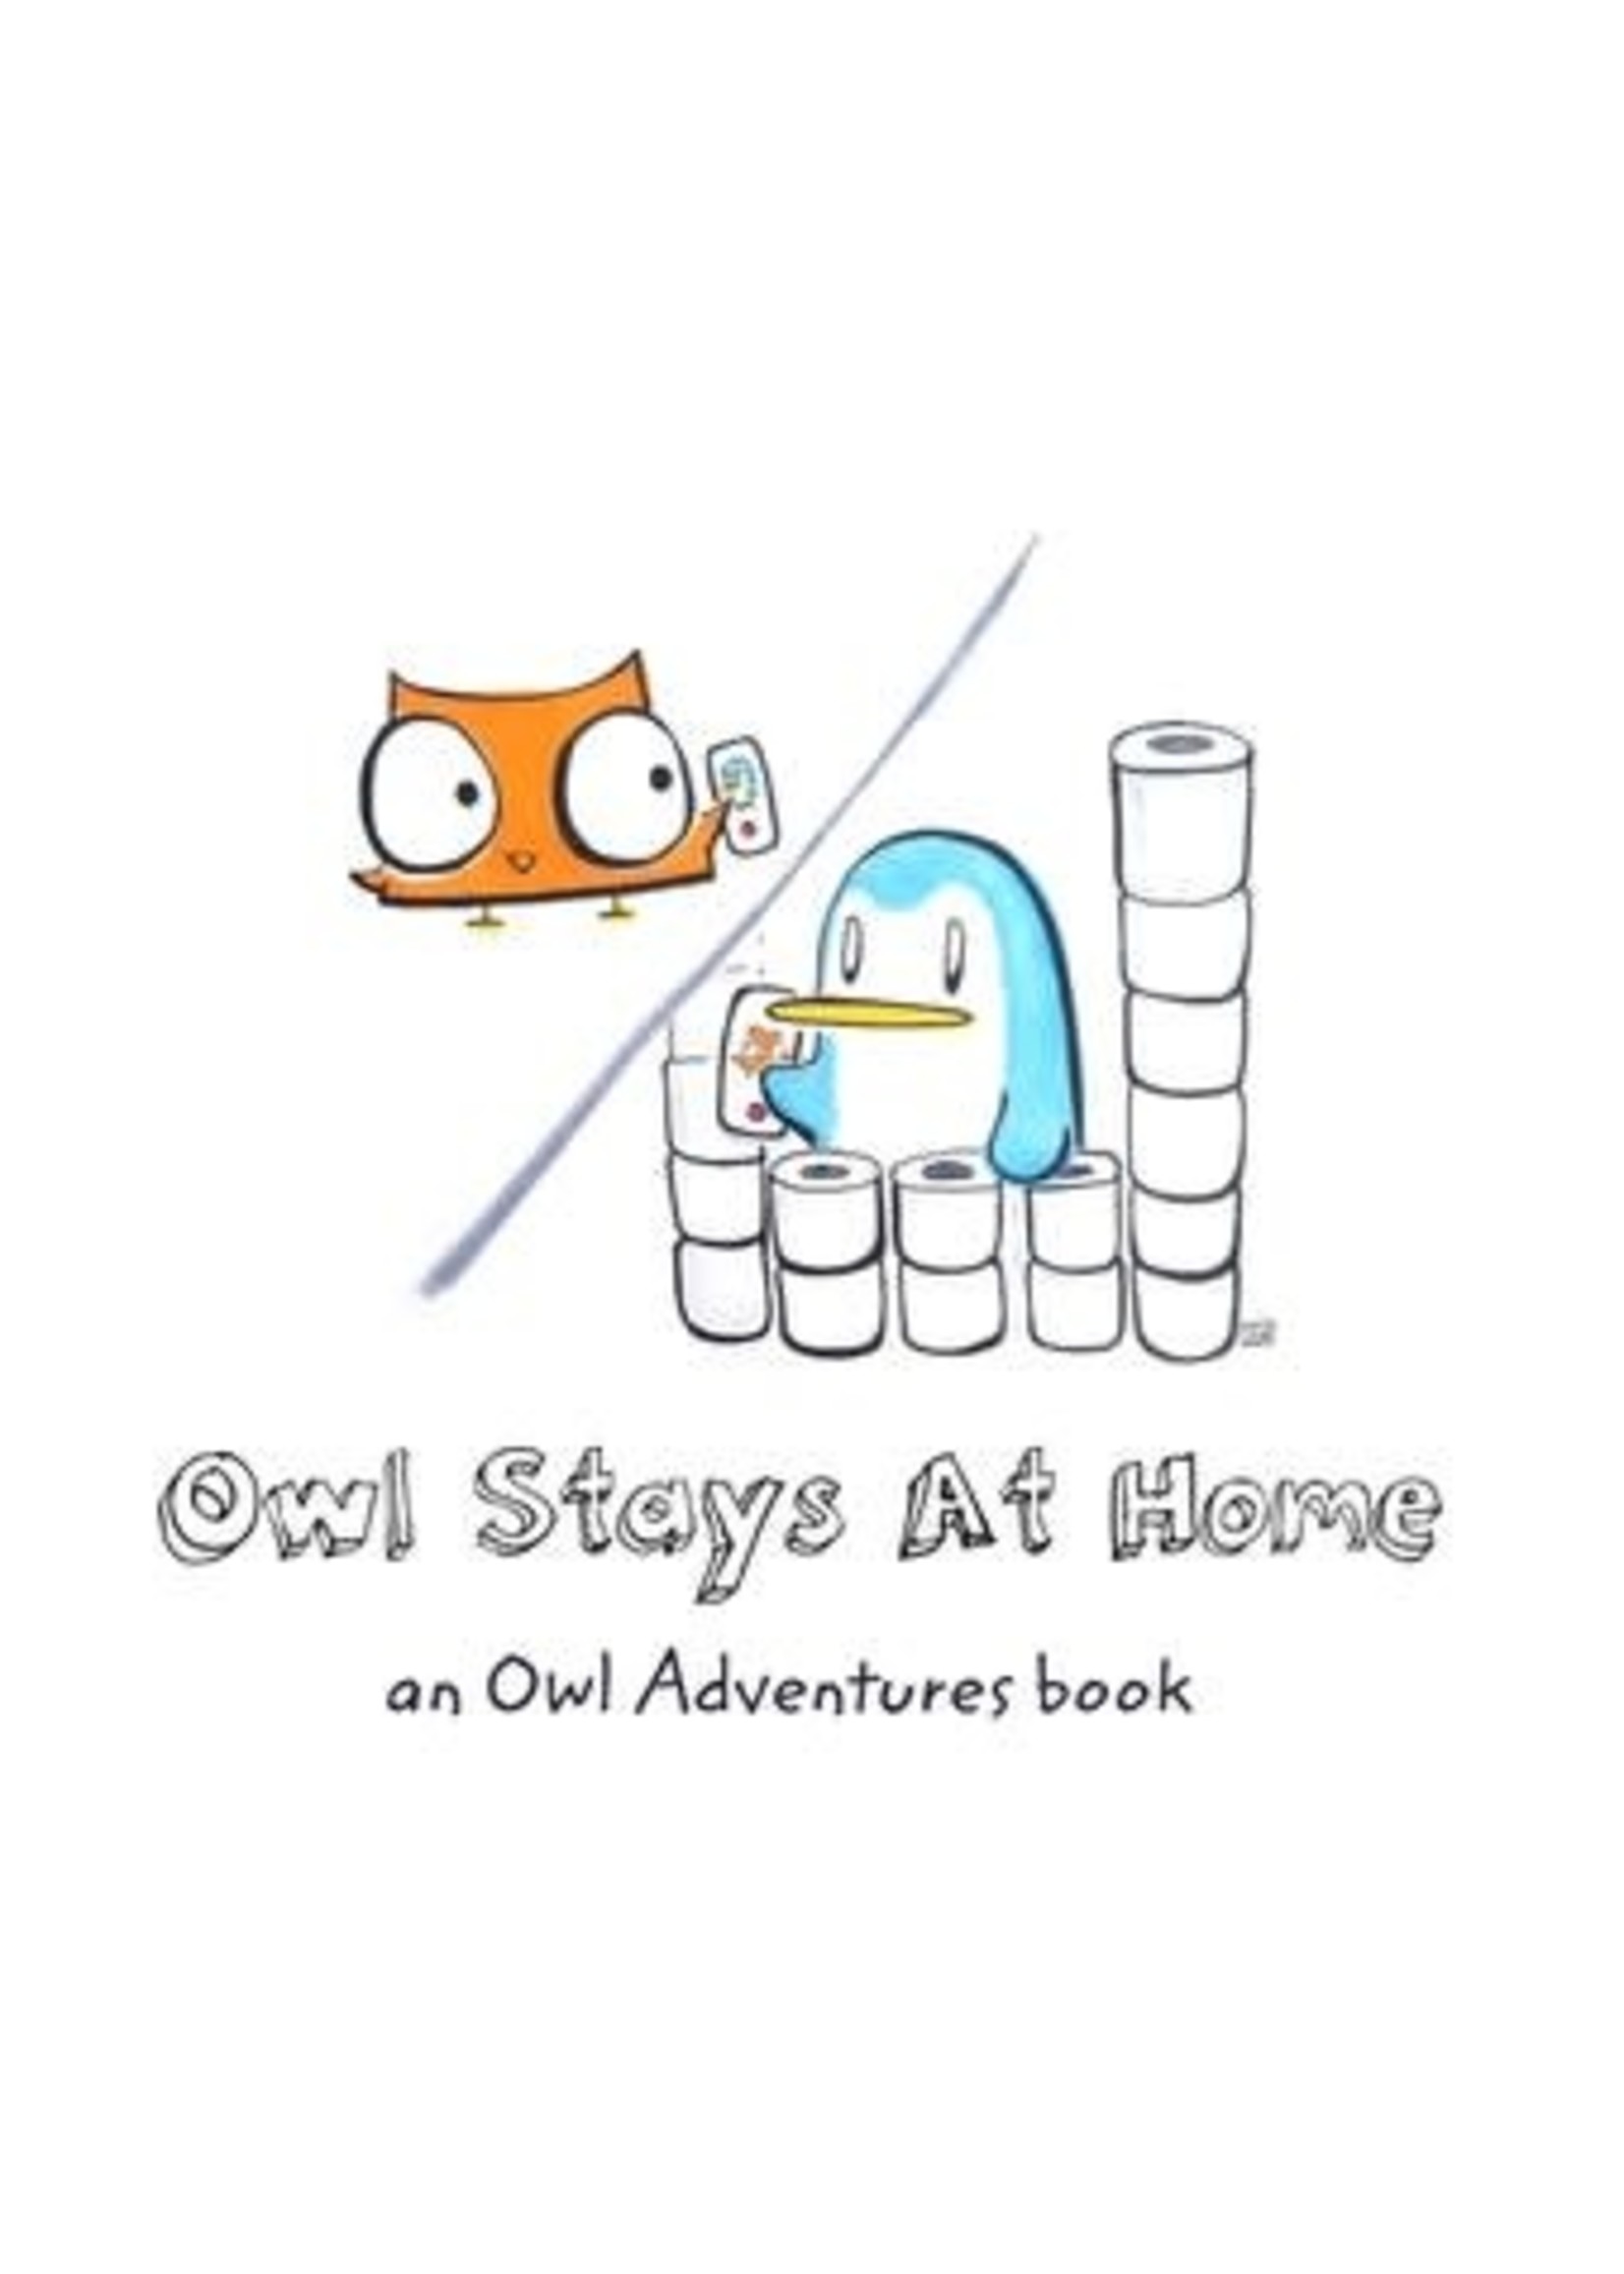 OWL ADVENTURES OWL STAYS AT HOME